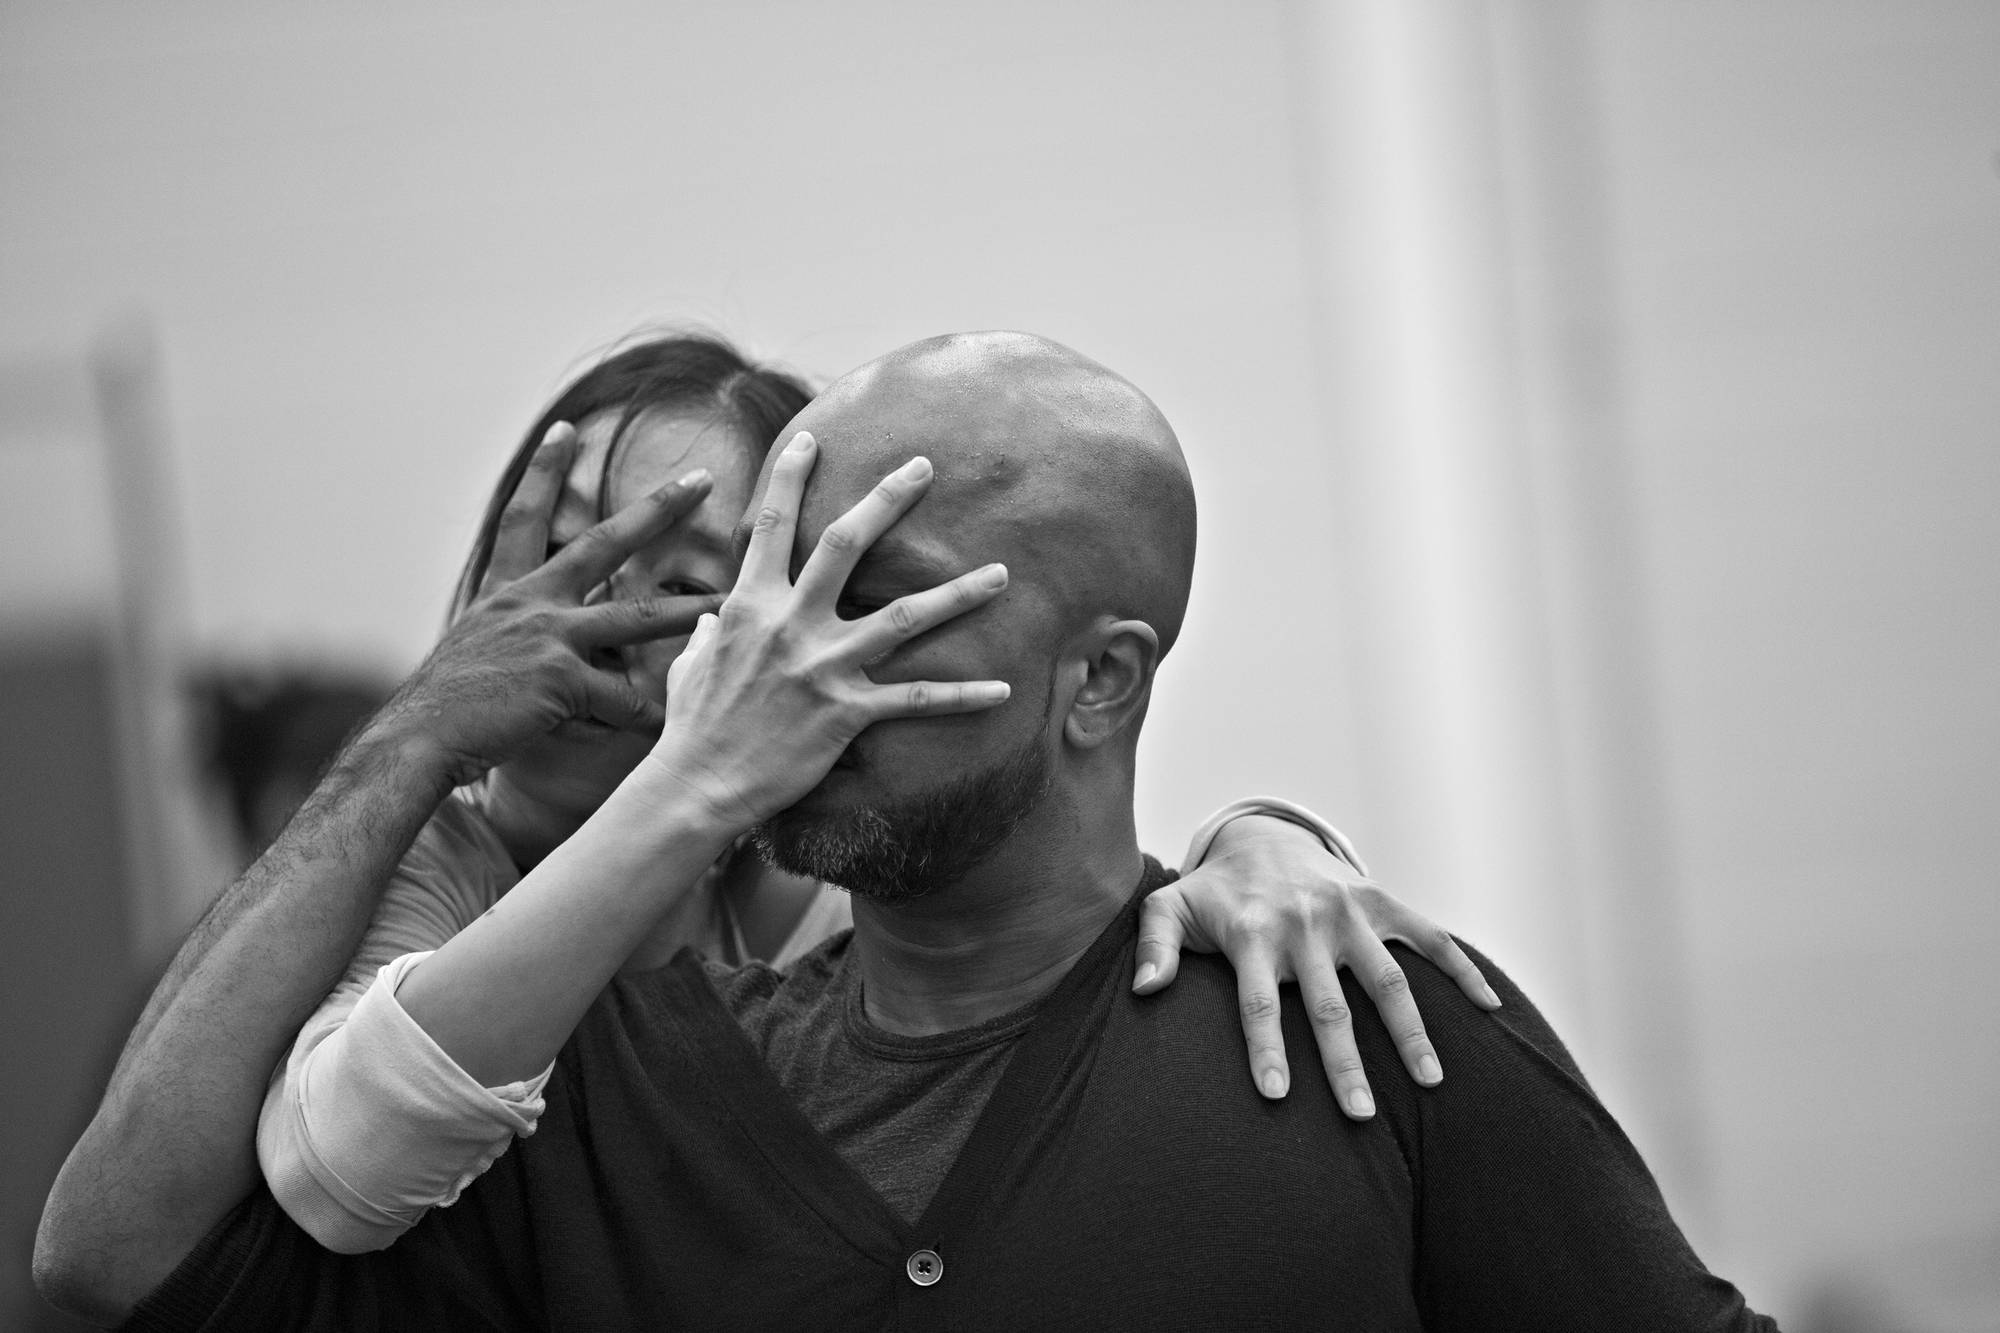 Akram Khan's practice and repertory of Until the Lions